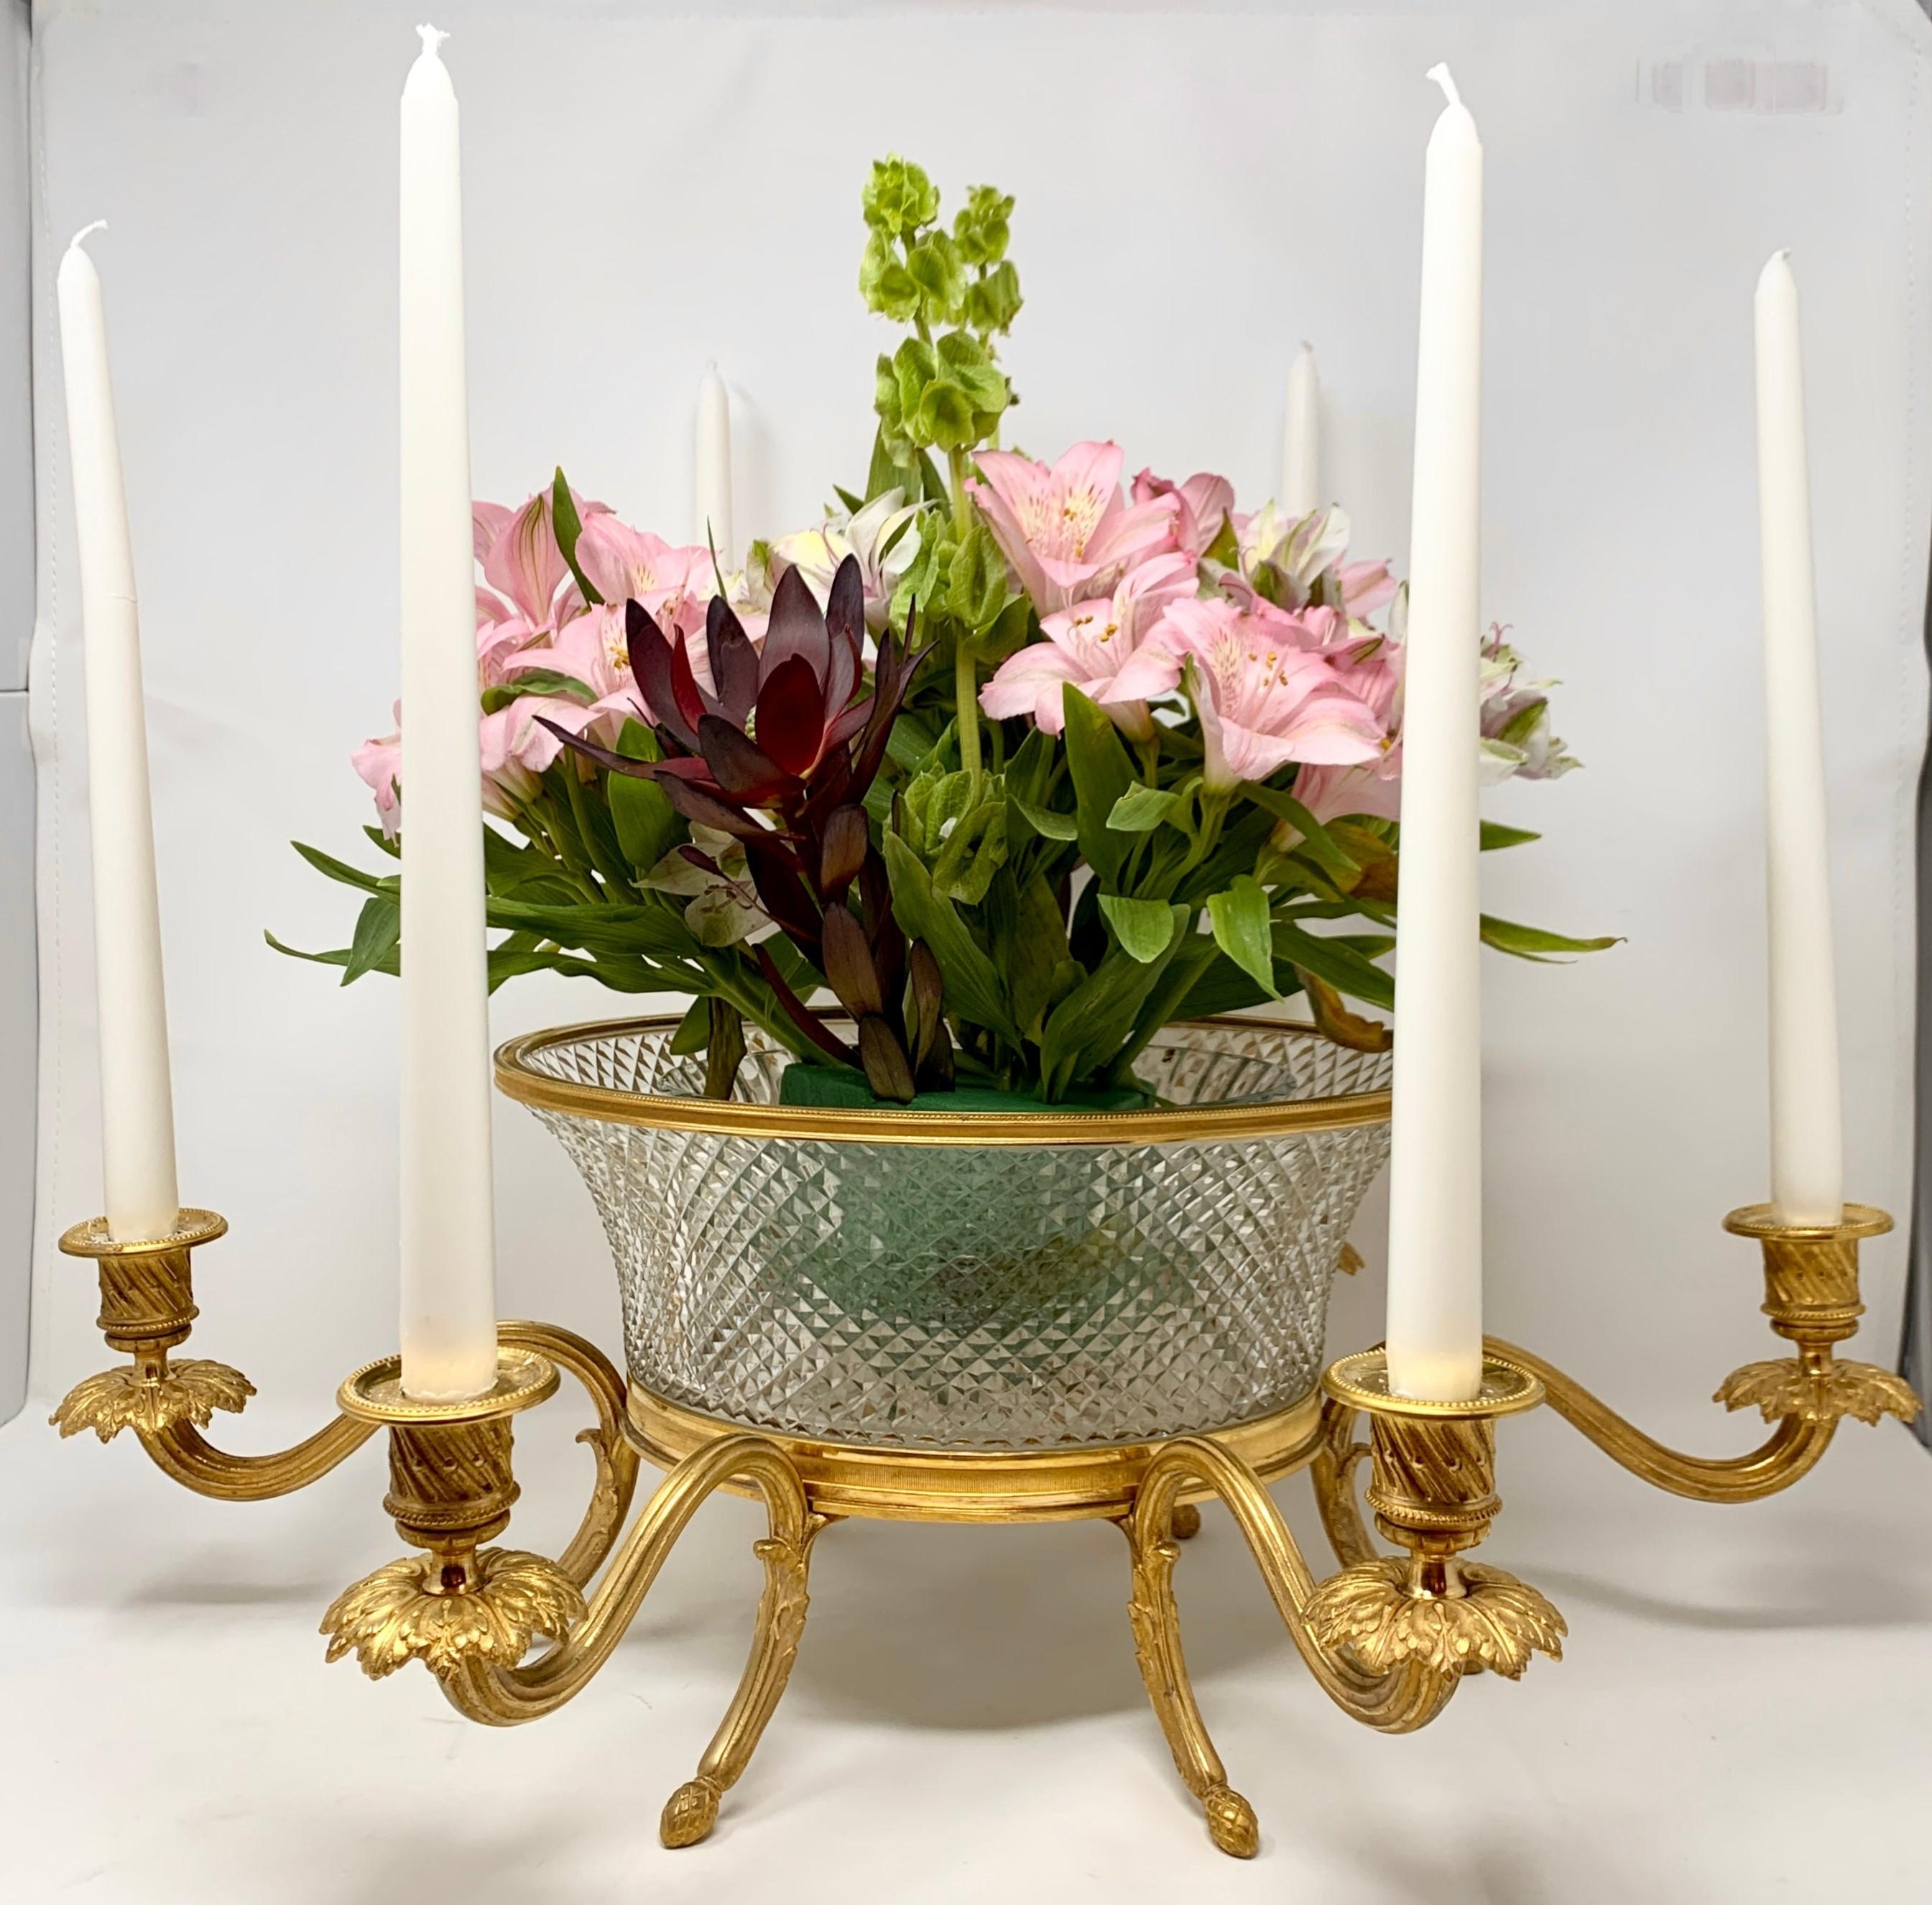 Antique French ormolu and cut crystal centerpiece with 6 candelabra, circa 1890-1910.